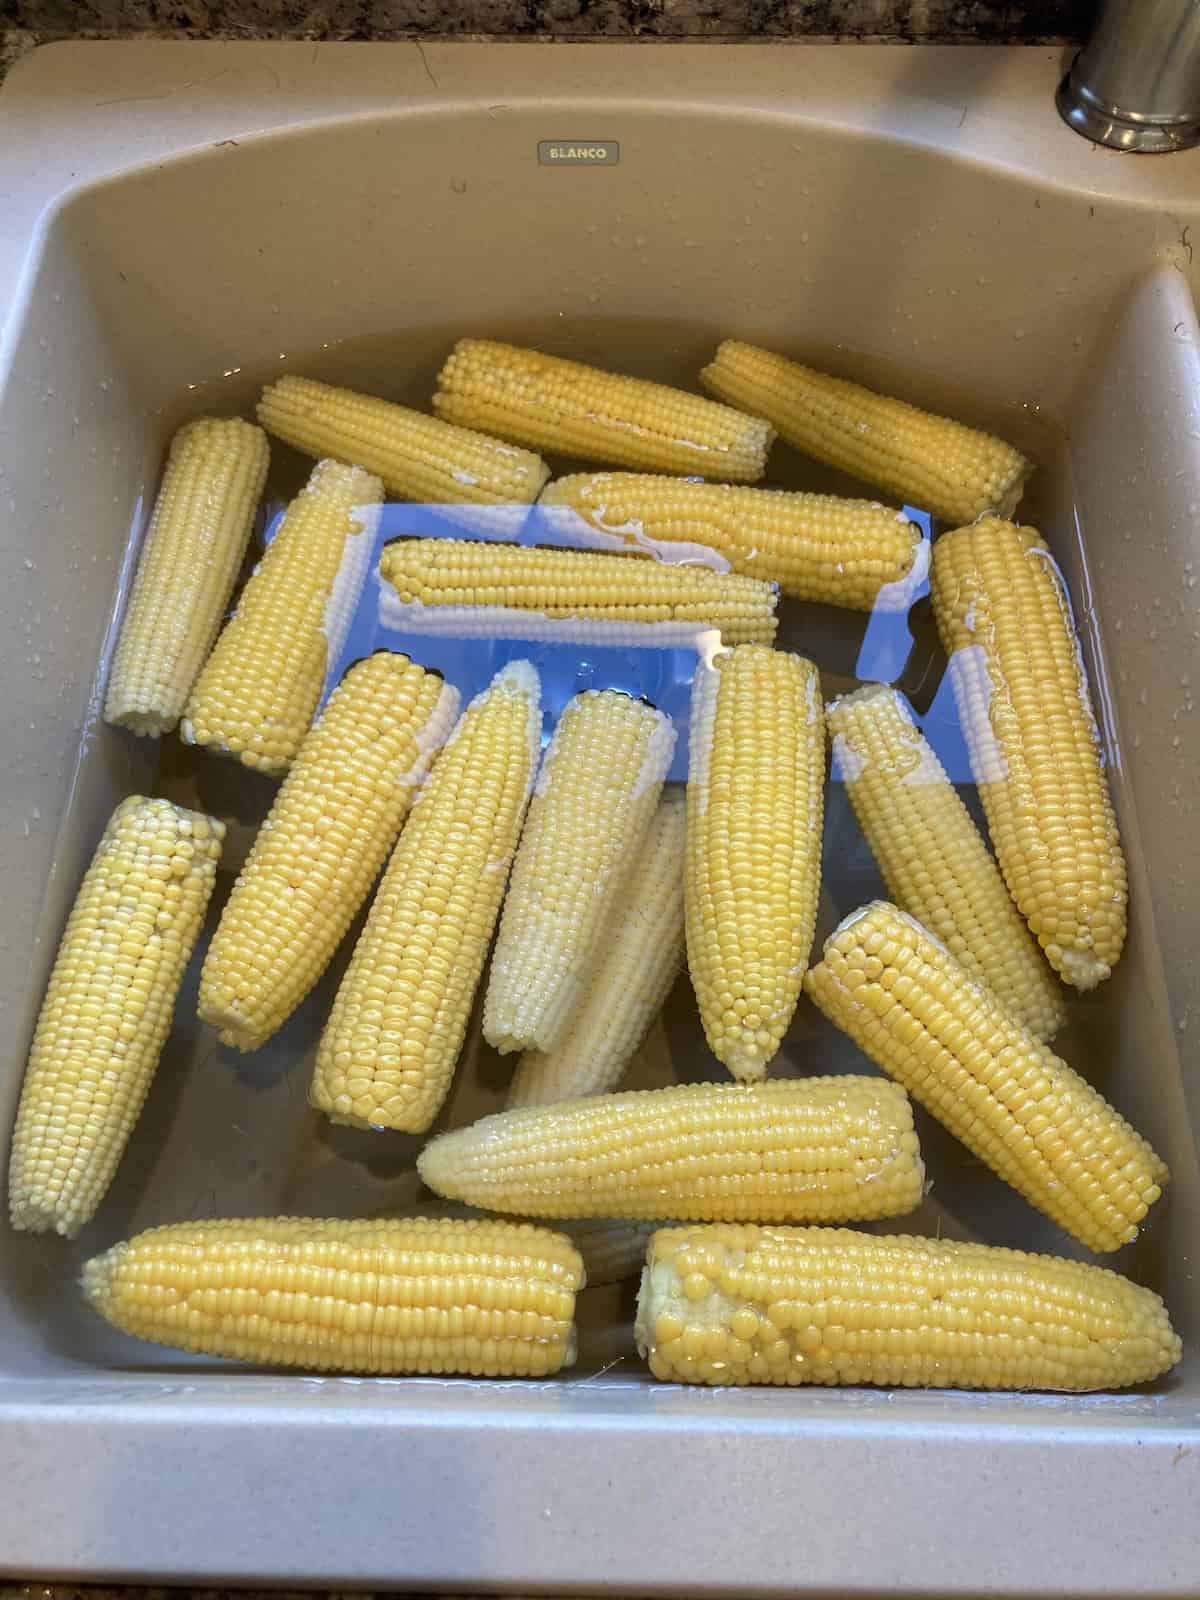 Blanched corn on the cob in a sink of water.